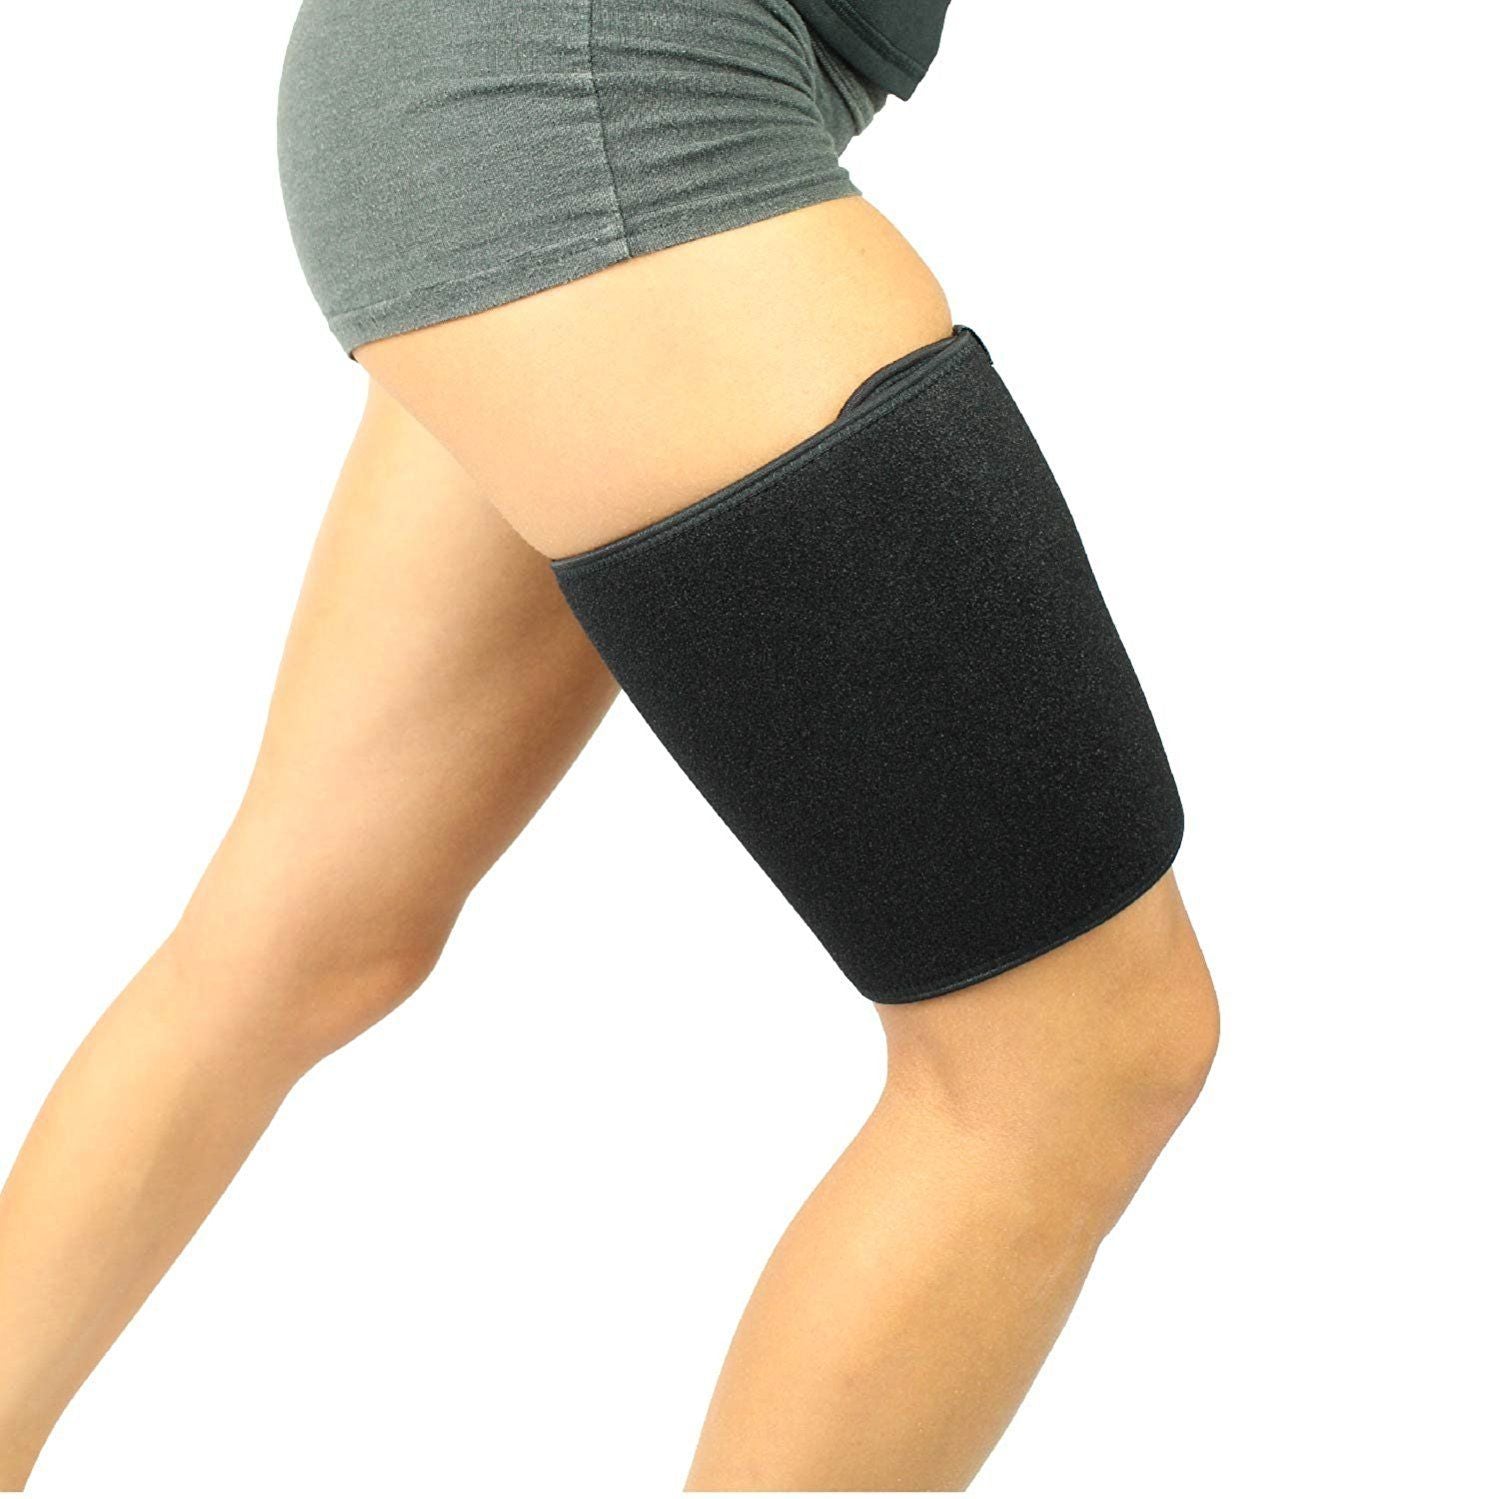 Thigh Quad Hamstring Compression Sleeve - Groin Support! – Brace